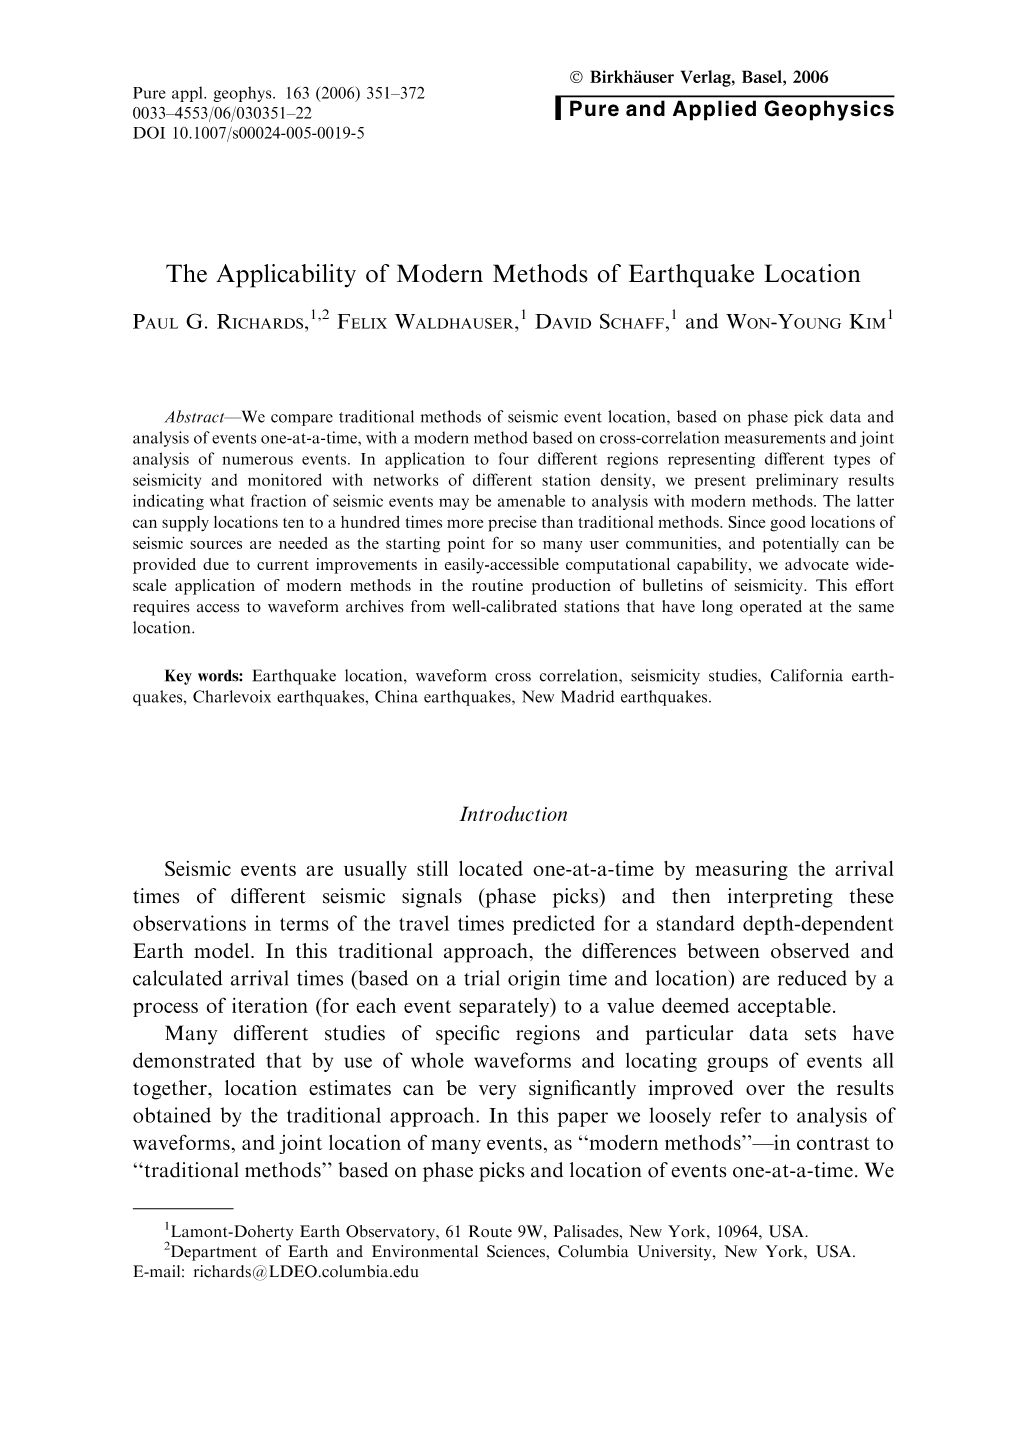 The Applicability of Modern Methods of Earthquake Location